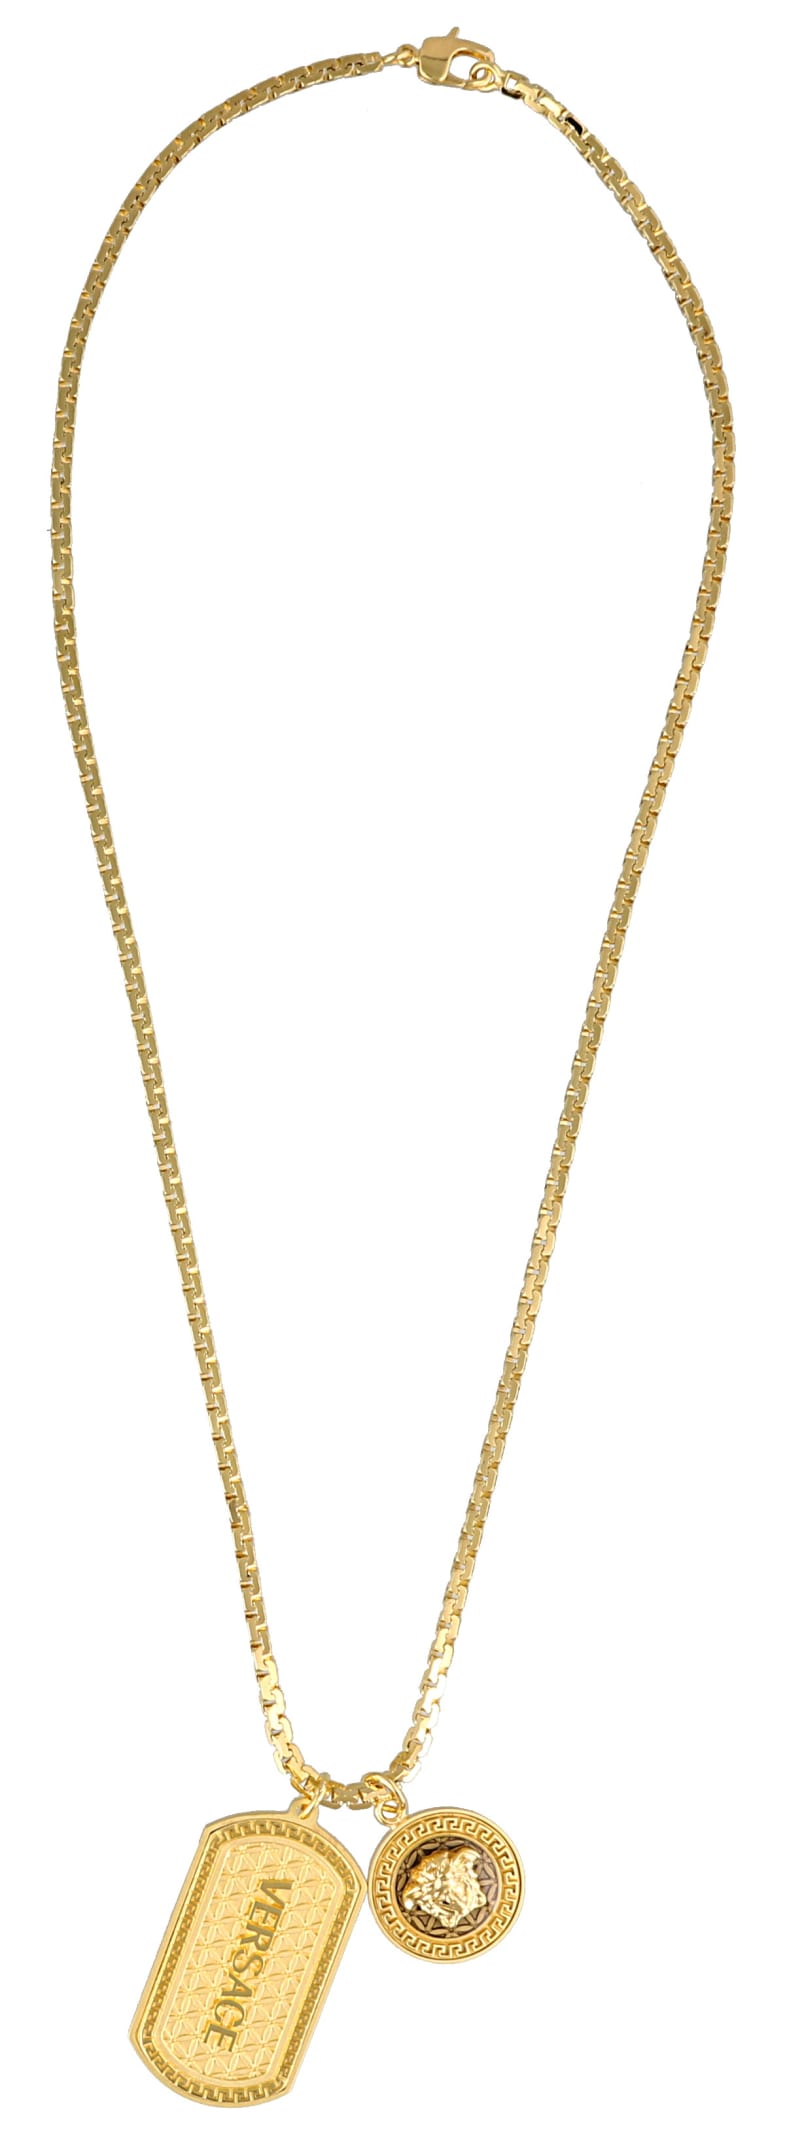 VERSACE MEDUSA NECKLACE WITH TAG,11211023